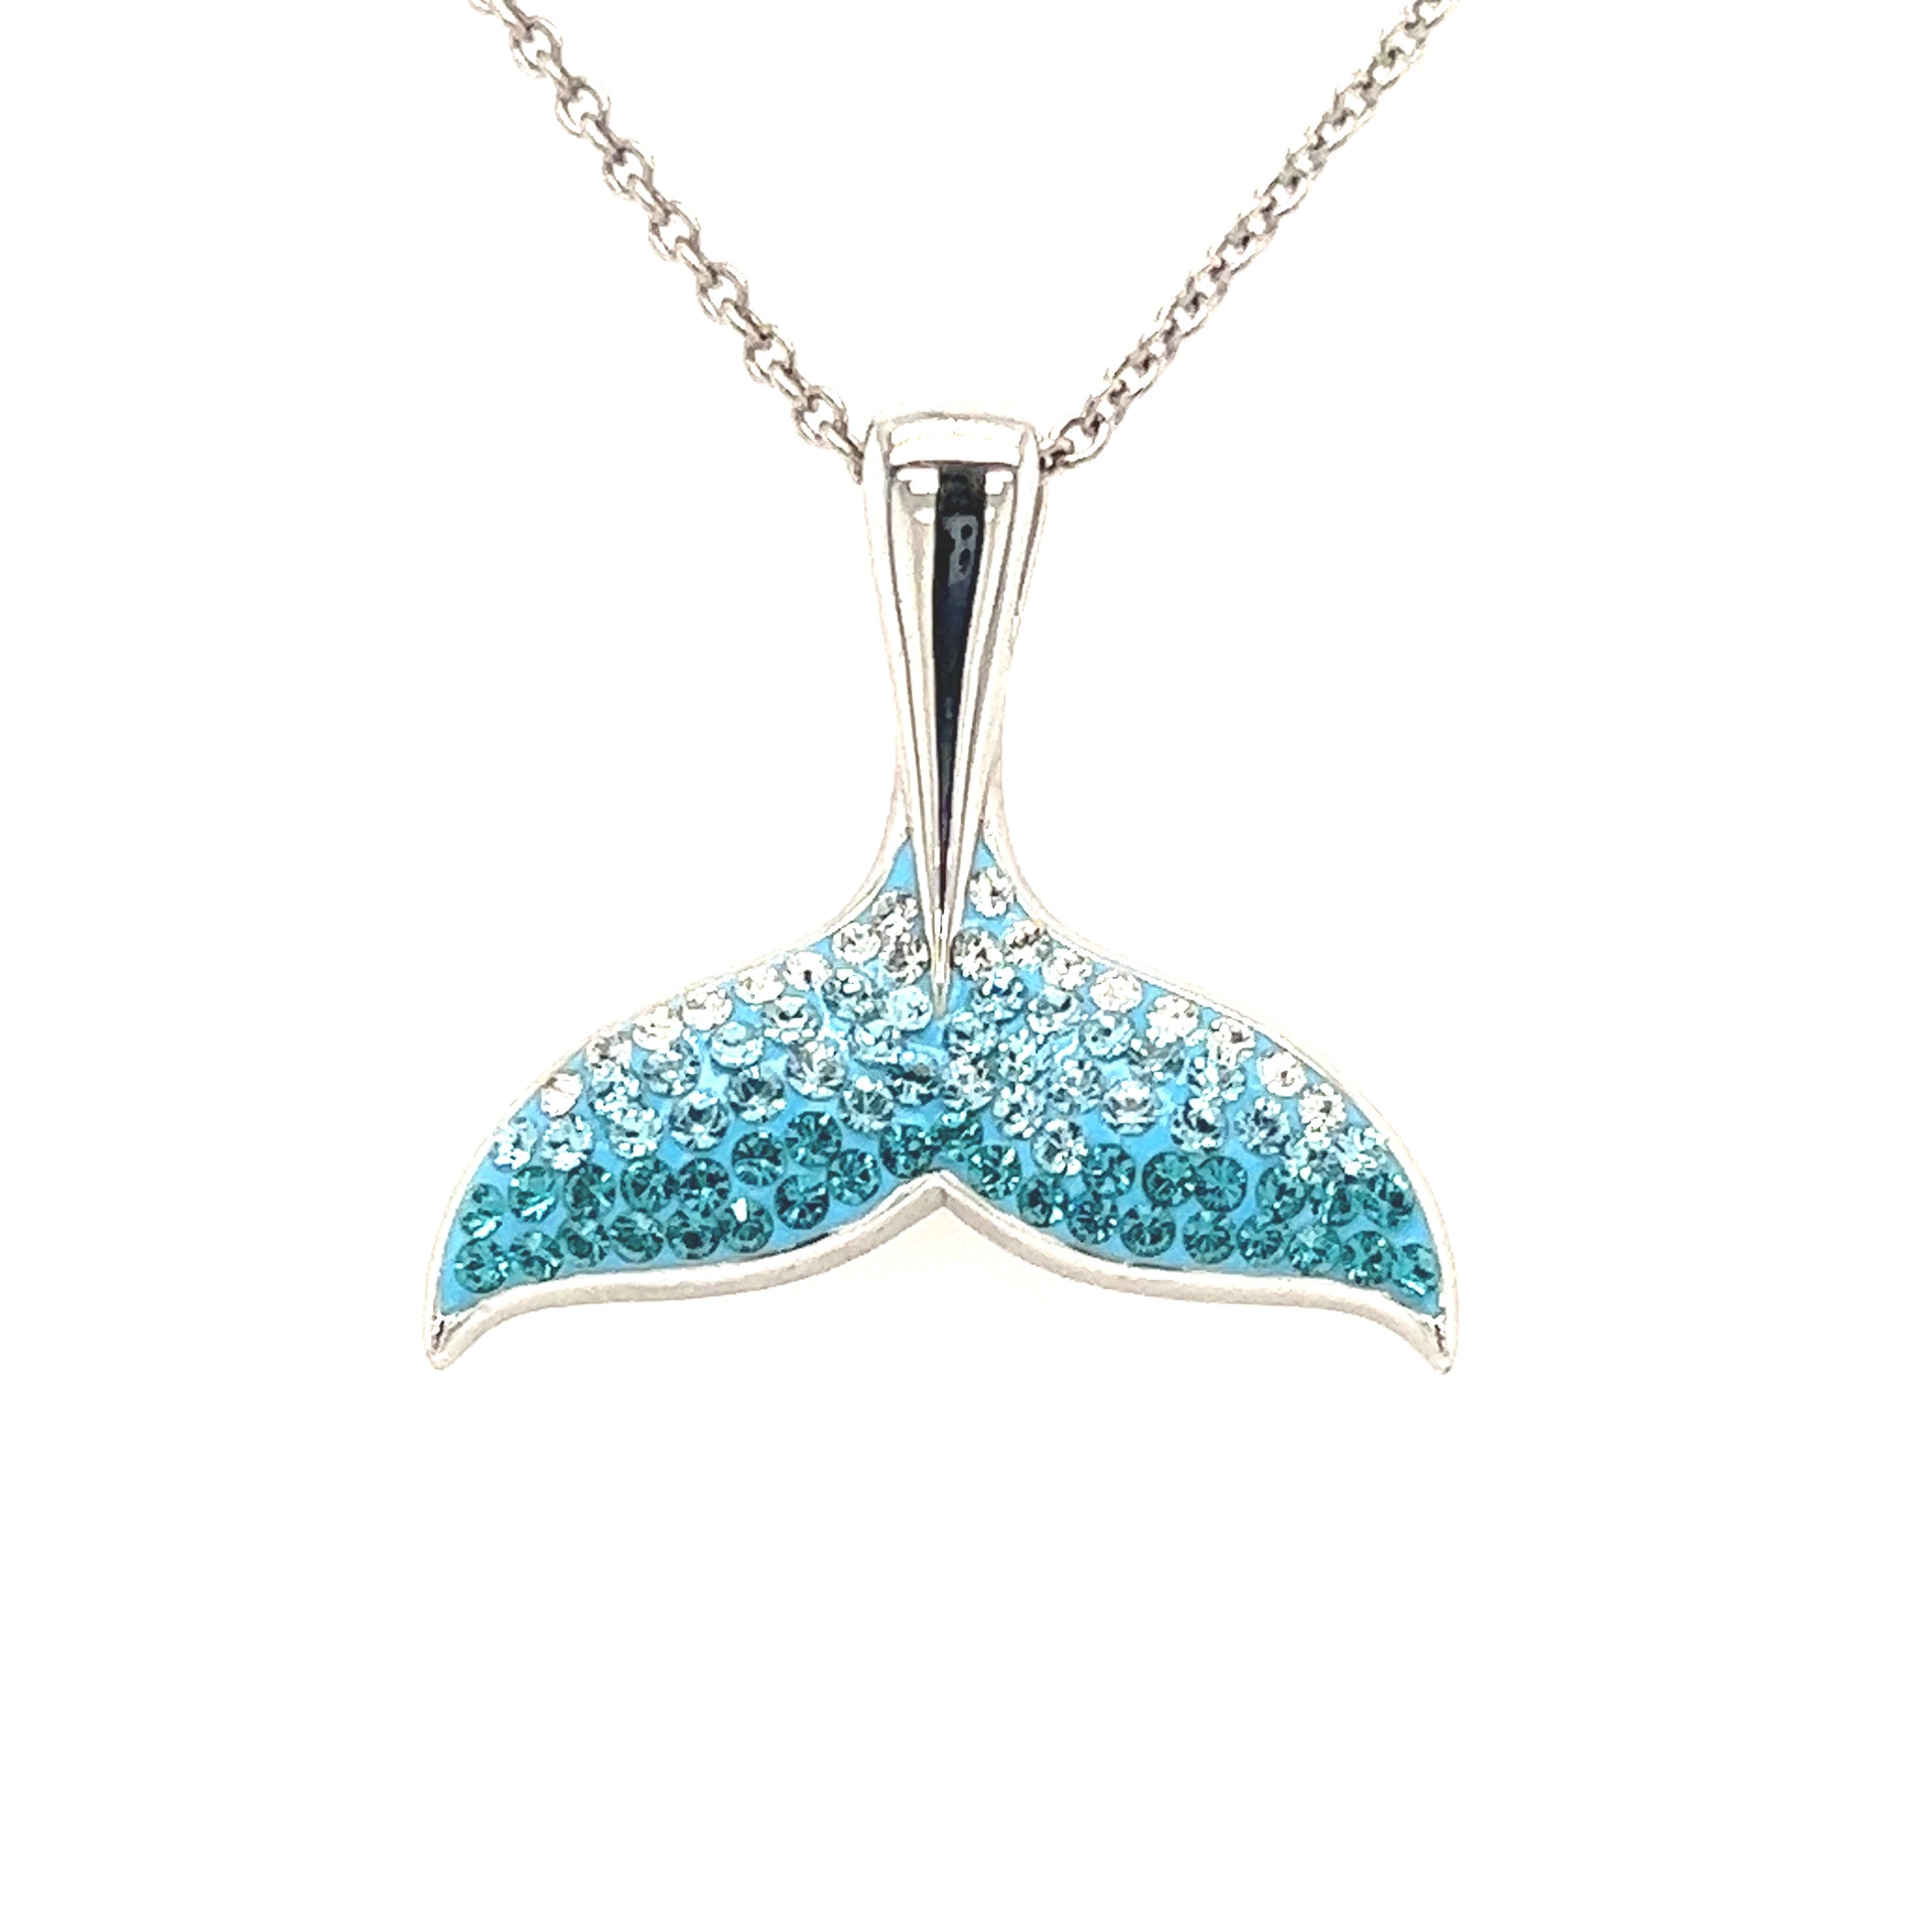 Whale Tail Necklace with Aqua Crystals in Sterling Silver Pendant Front View